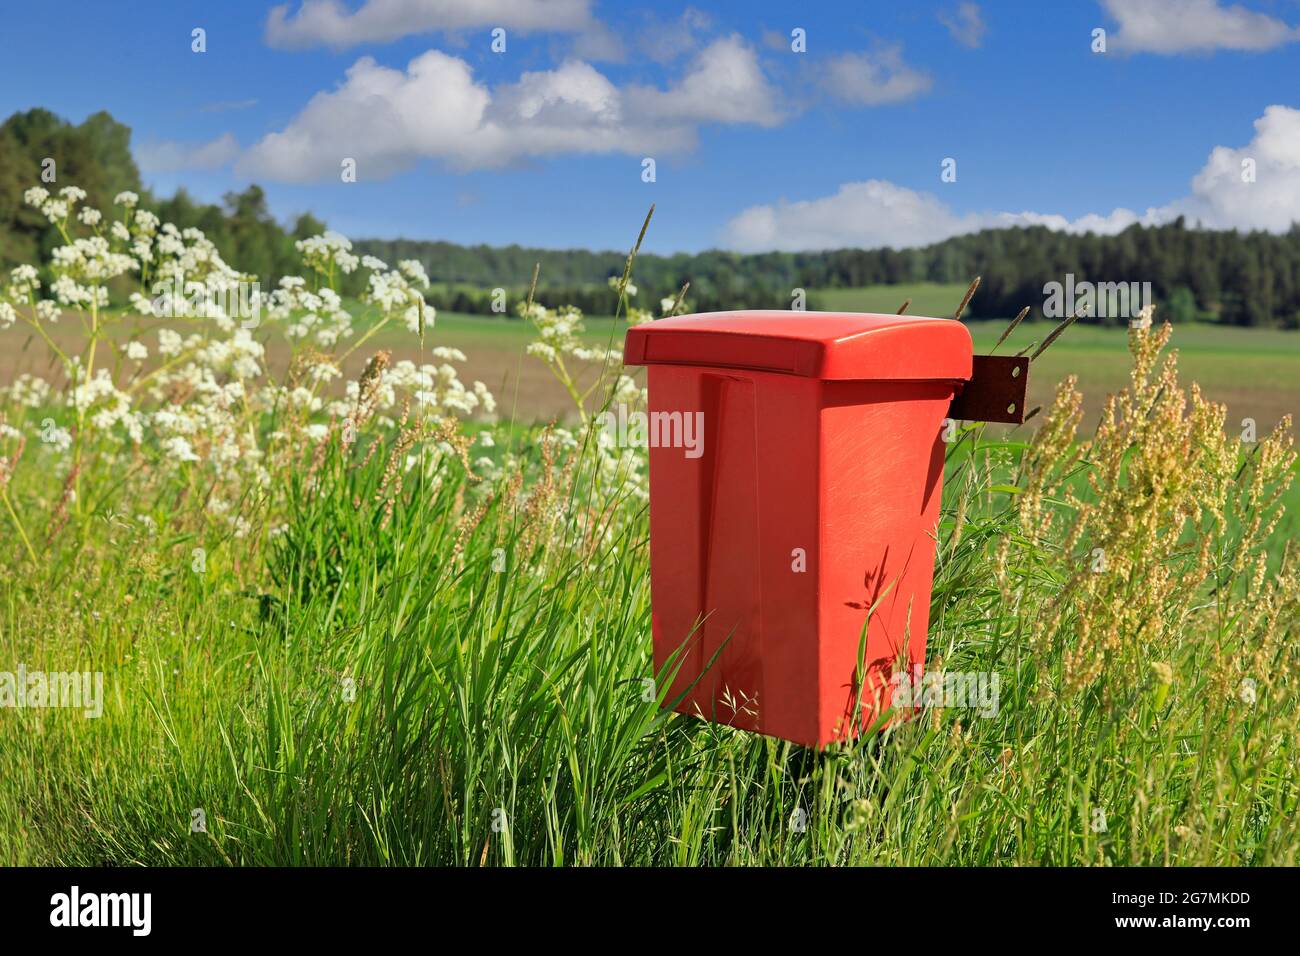 Red roadside mailbox in the country on a beautiful day of summer with flowering plants, green grass and blue sky with clouds. Stock Photo